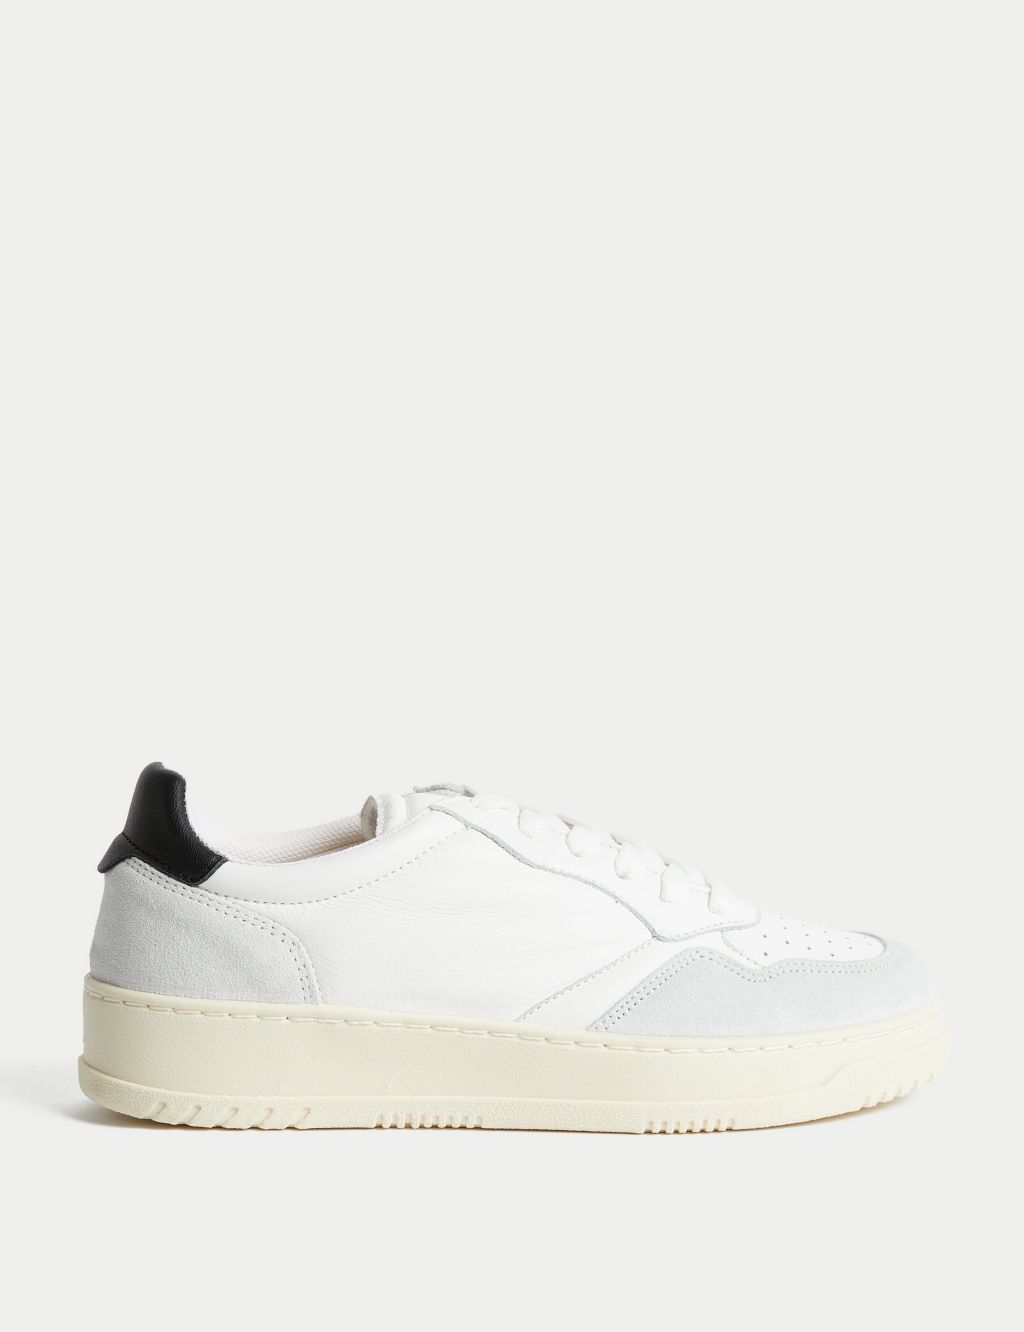 Leather Lace Up Suede Panel Trainers image 1